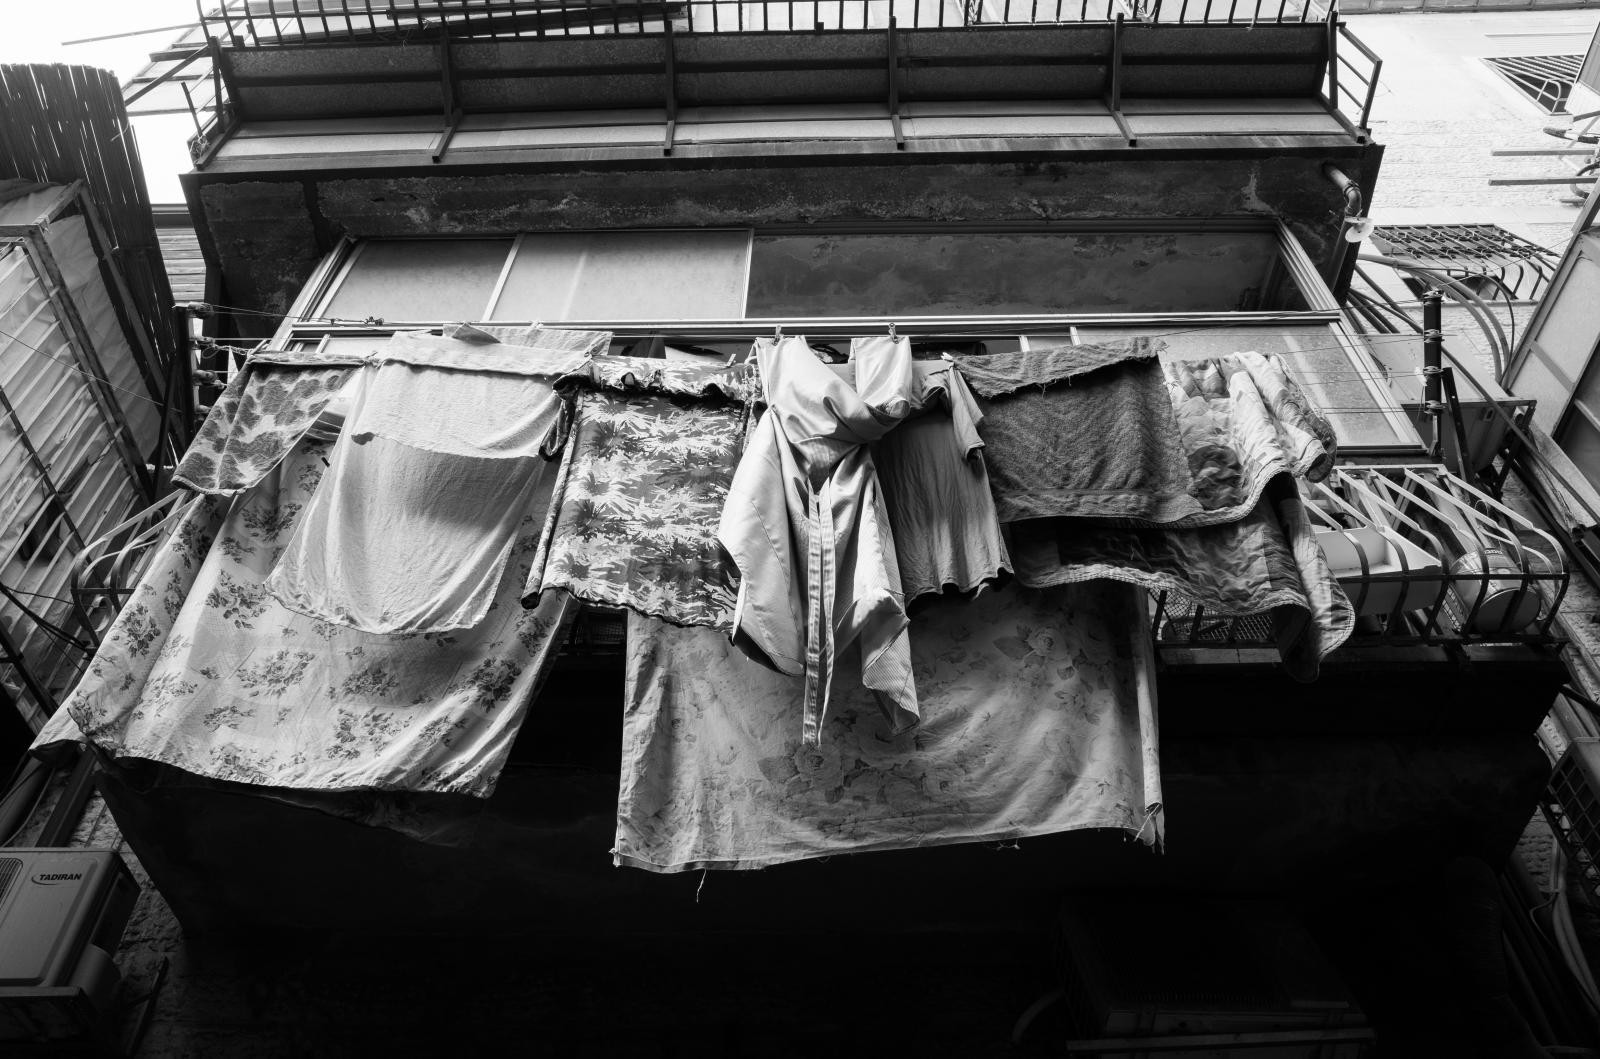 Drying clothes on the balcony